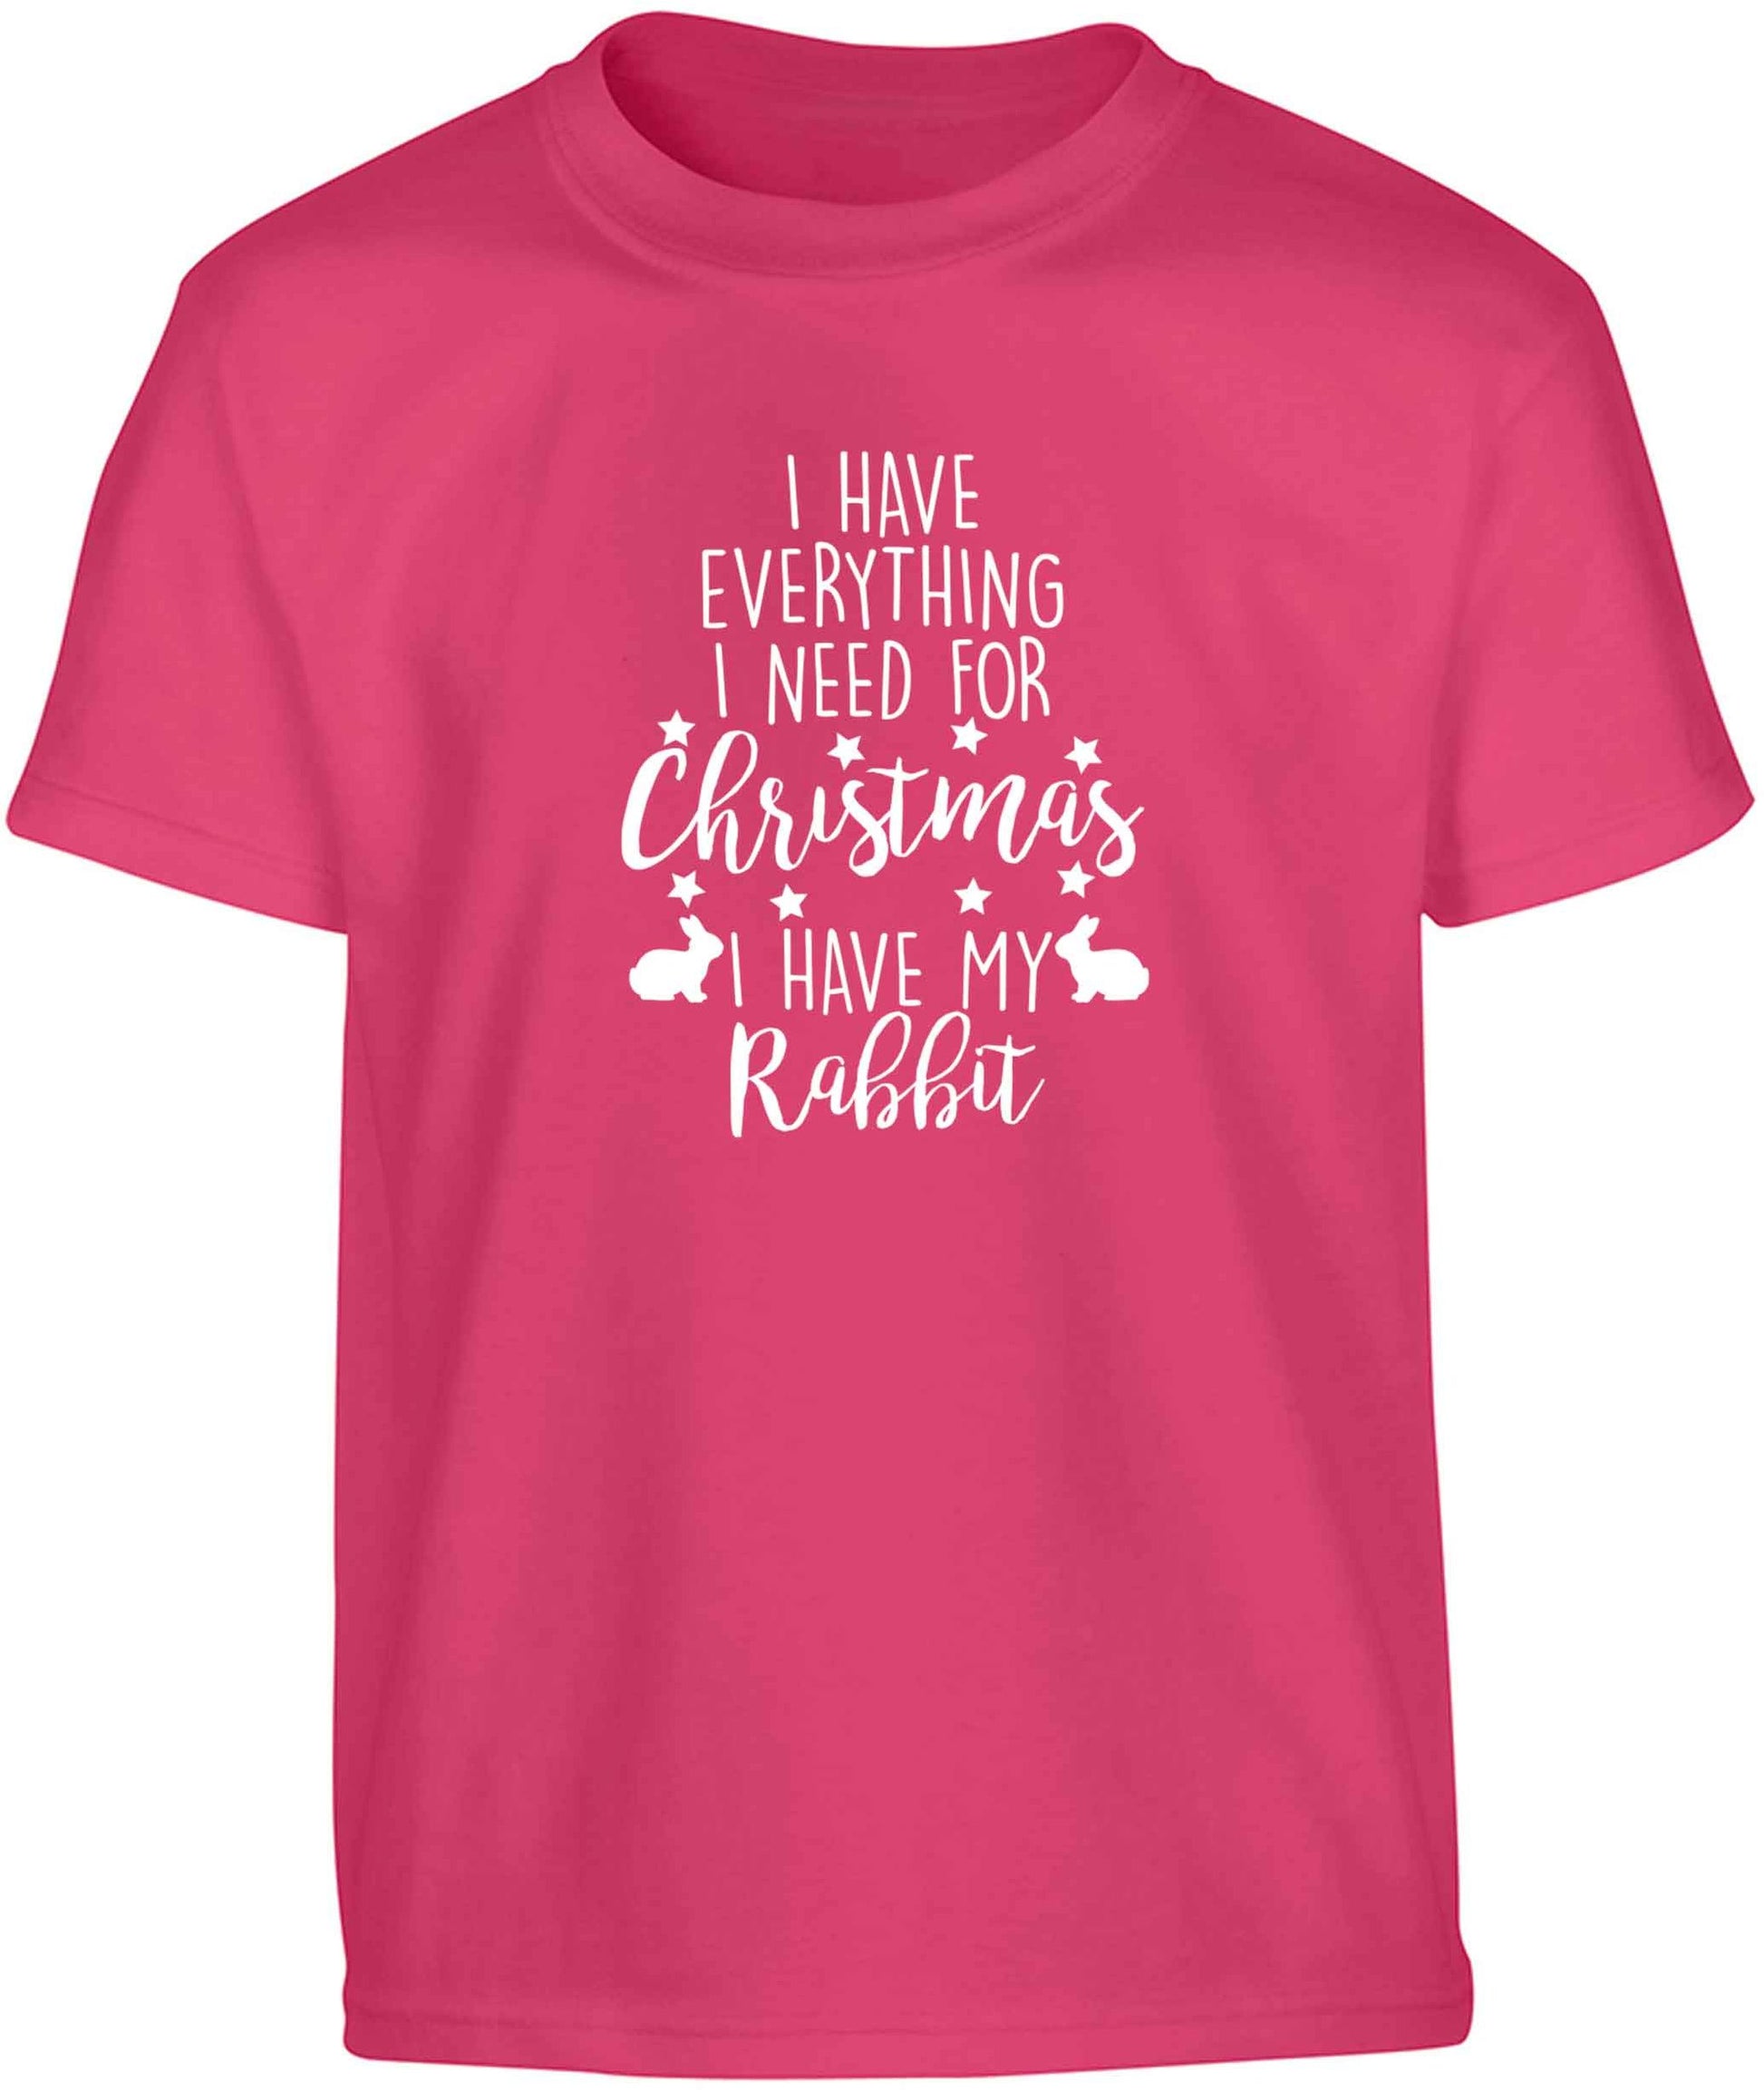 I have everything I need for Christmas I have my rabbit Children's pink Tshirt 12-13 Years